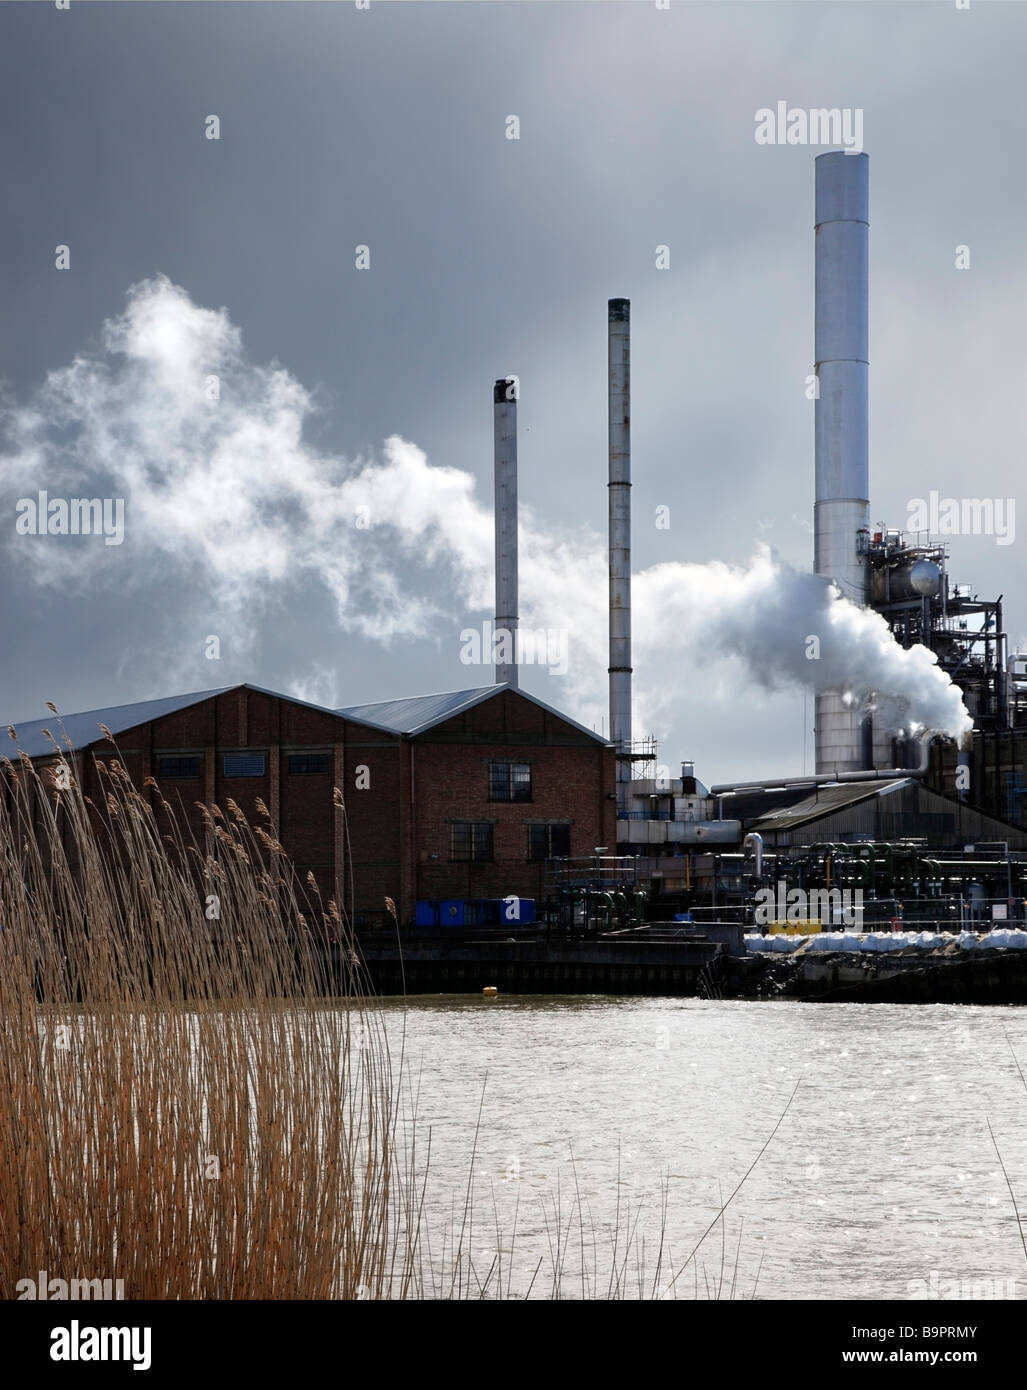 The Smurfit Kappa Paper Mill on the banks of the river Medway Mill Street Snodland Kent England UK ME6 5AX Stock Photo